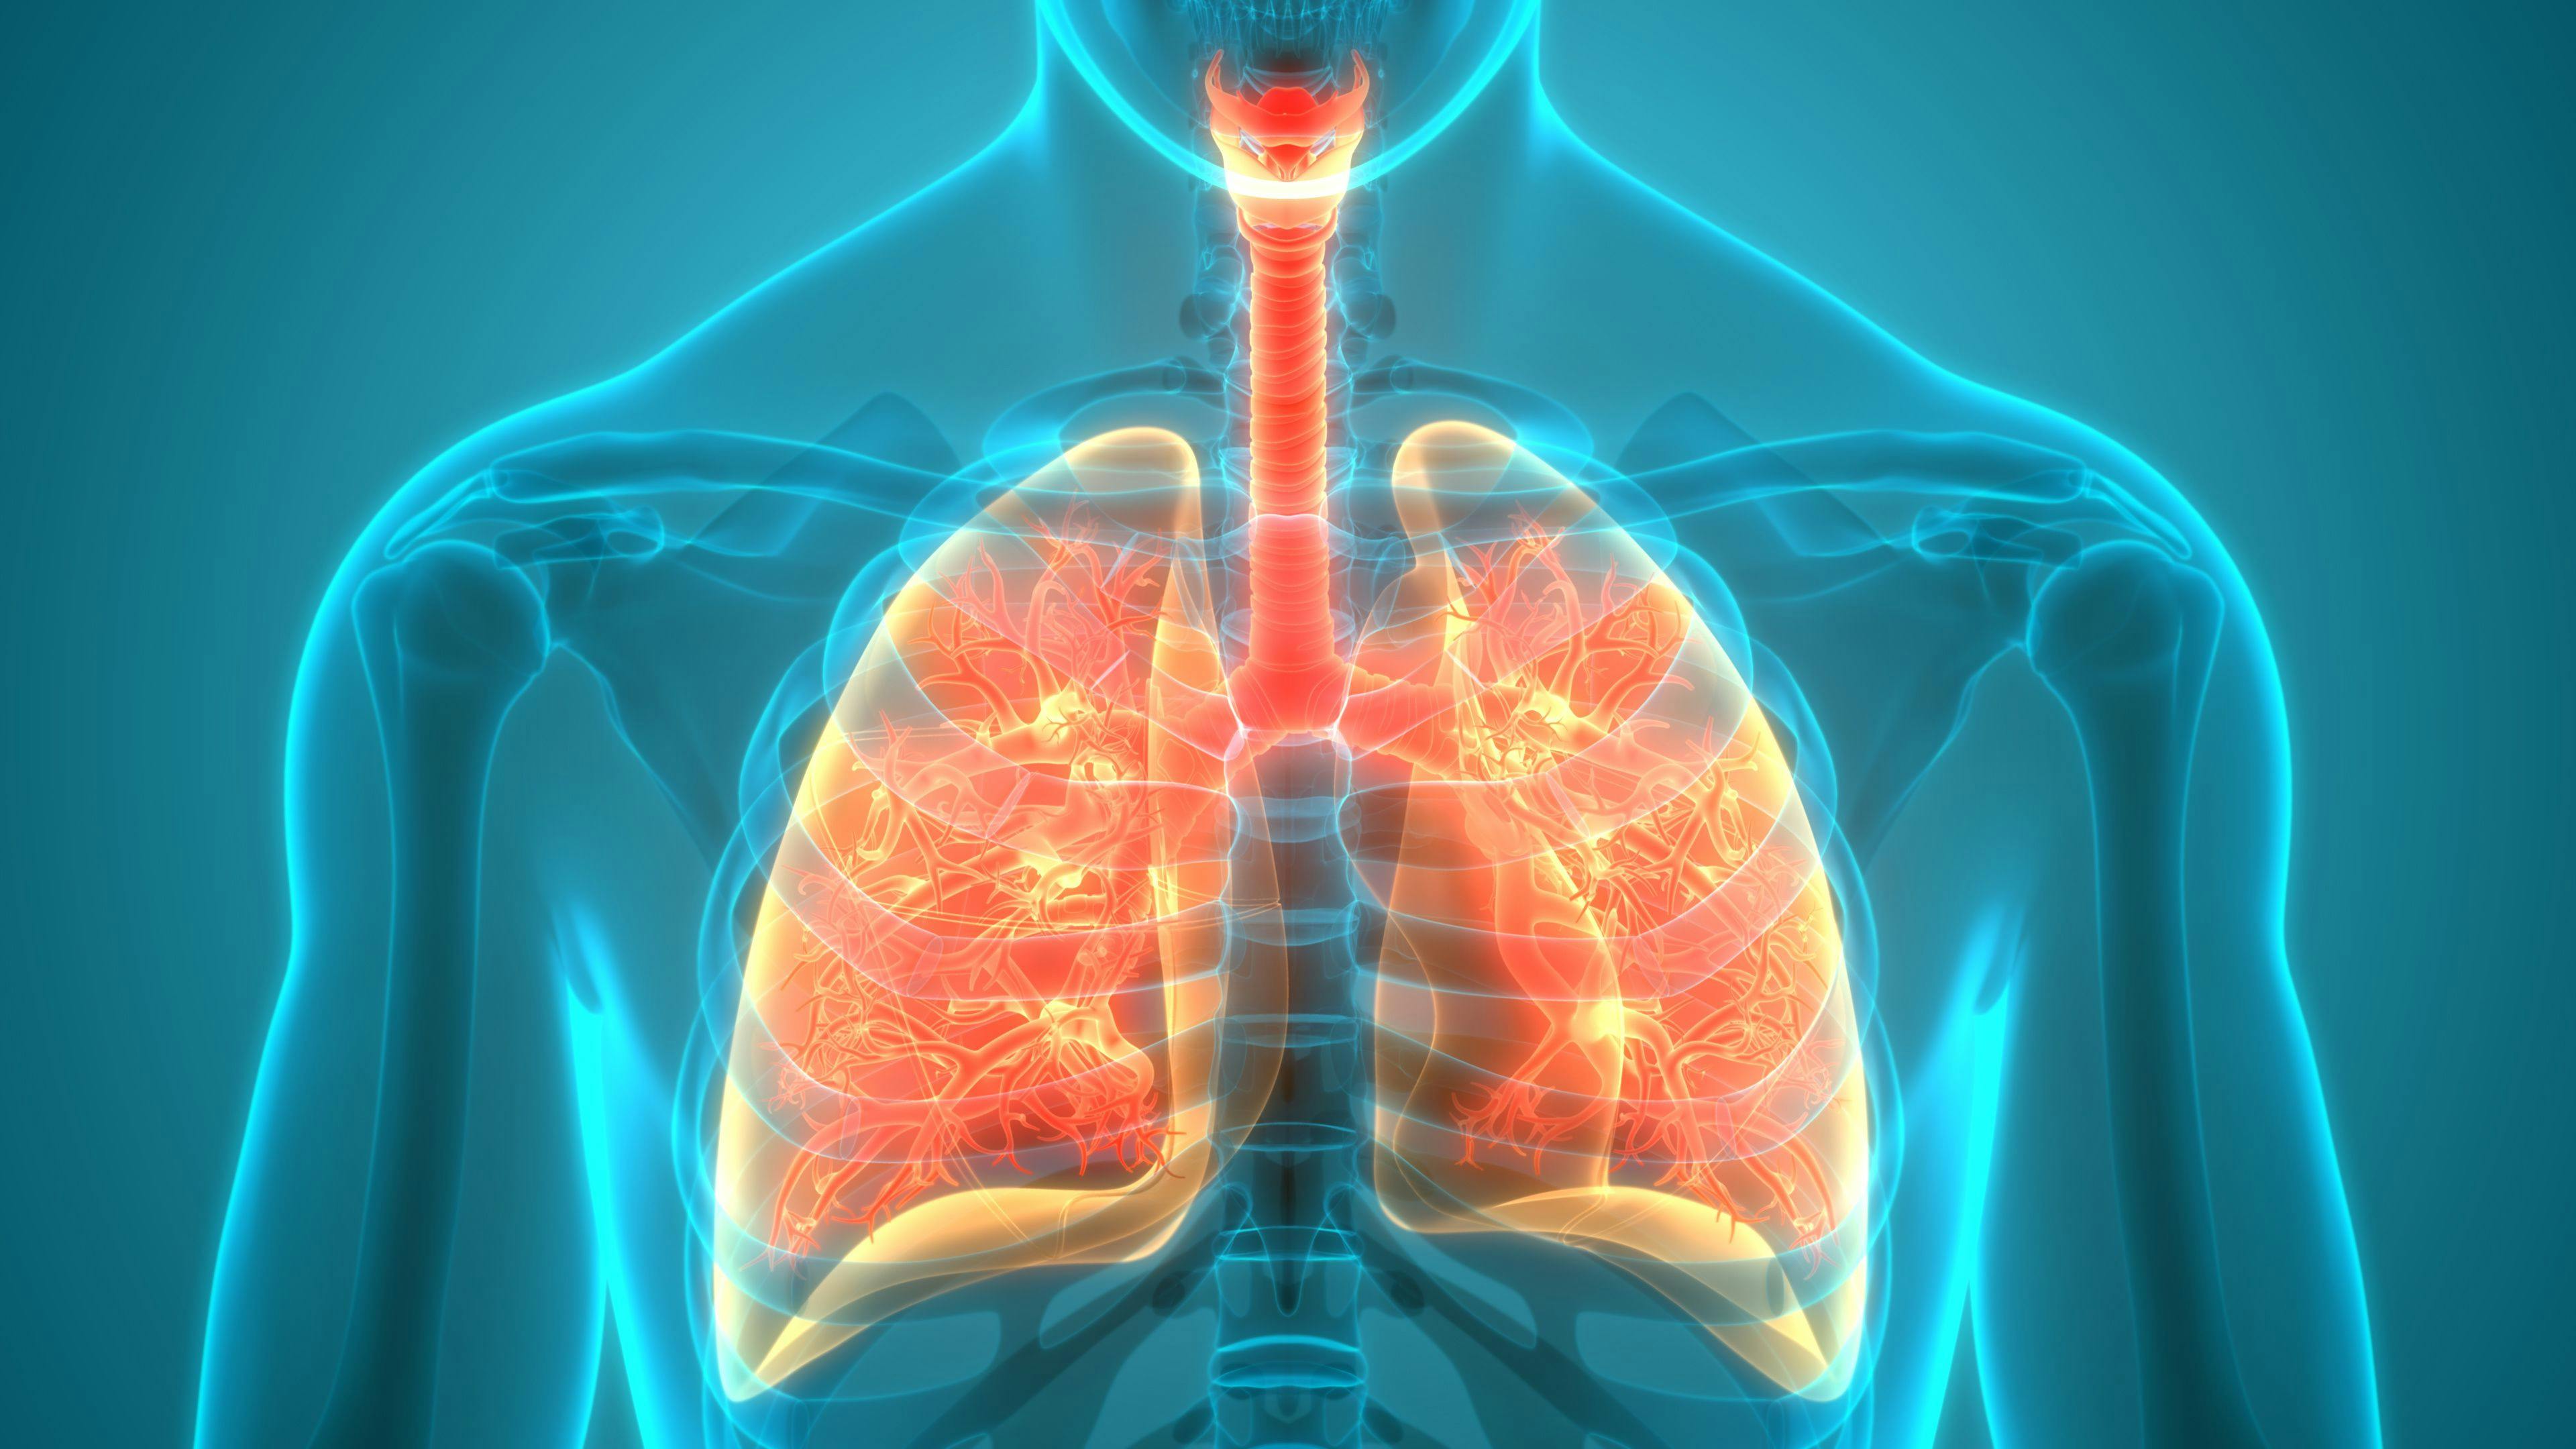 Findings from the phase 1b KRYSTAL-1 trial support the continued development of adagrasib in the treatment of patients with KRAS G12C–mutated non–small cell lung cancer and central nervous system metastases.